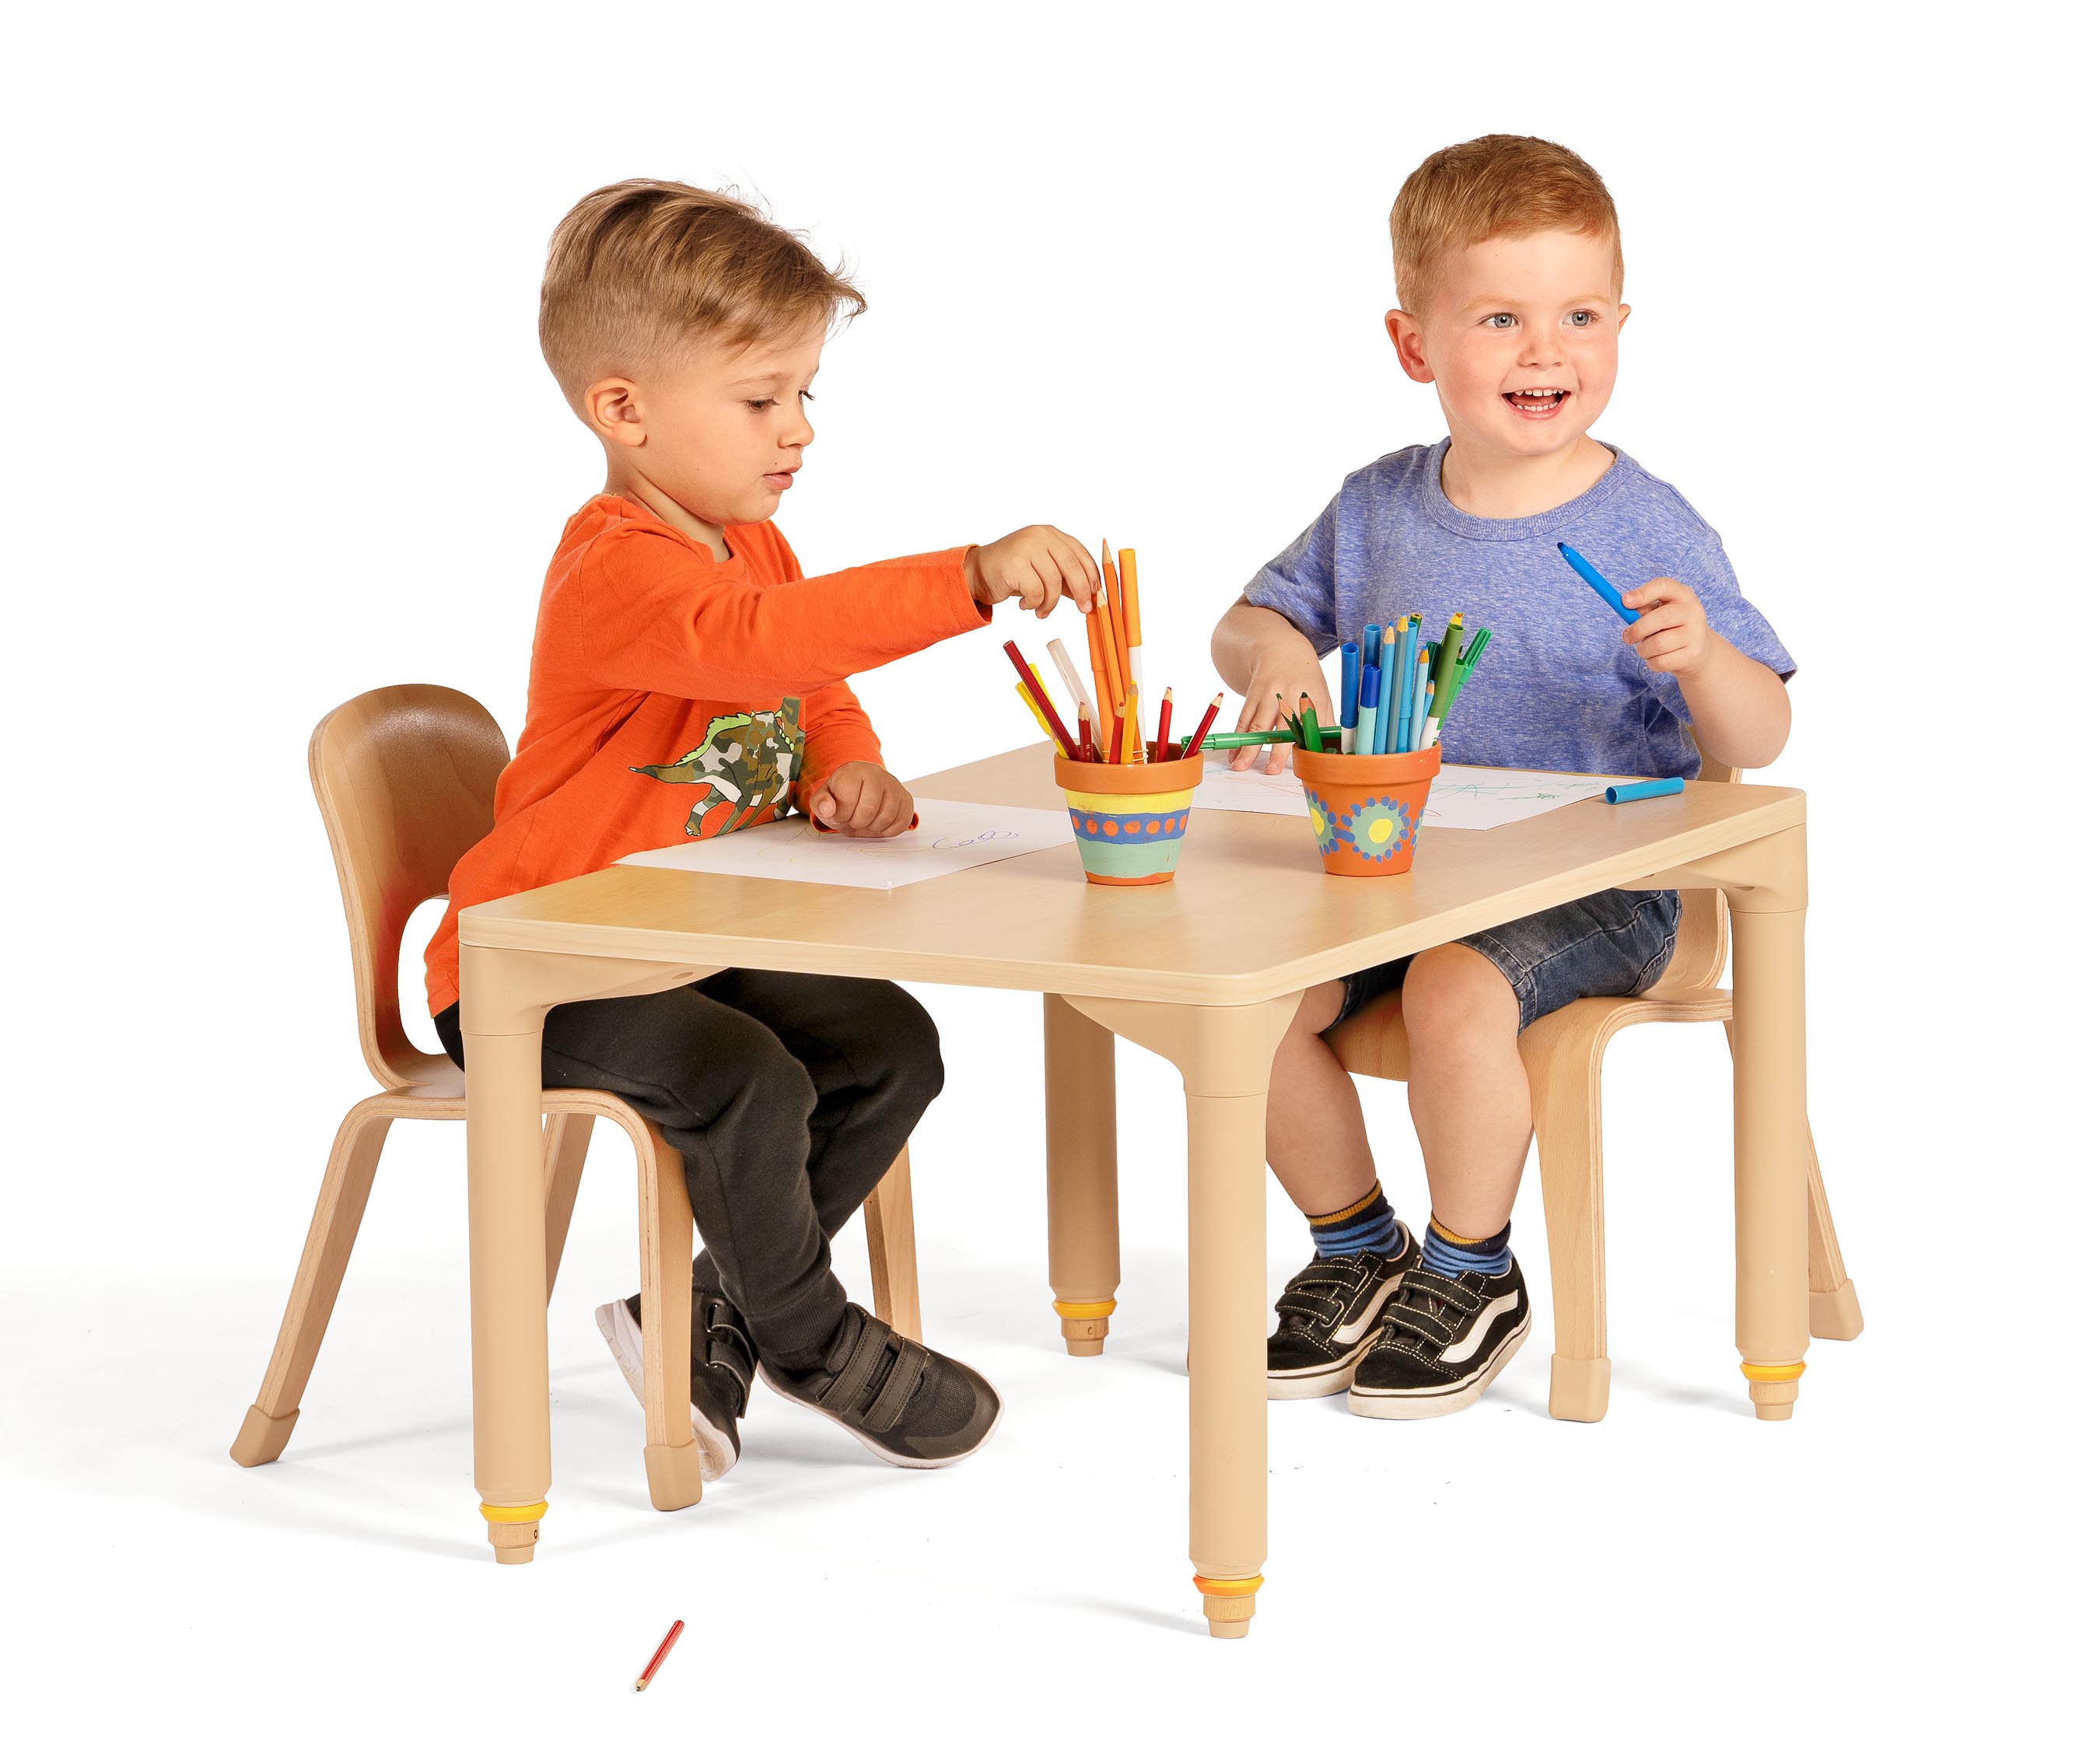 Two boys sitting in Woodcrest chairs doing mark-making at table